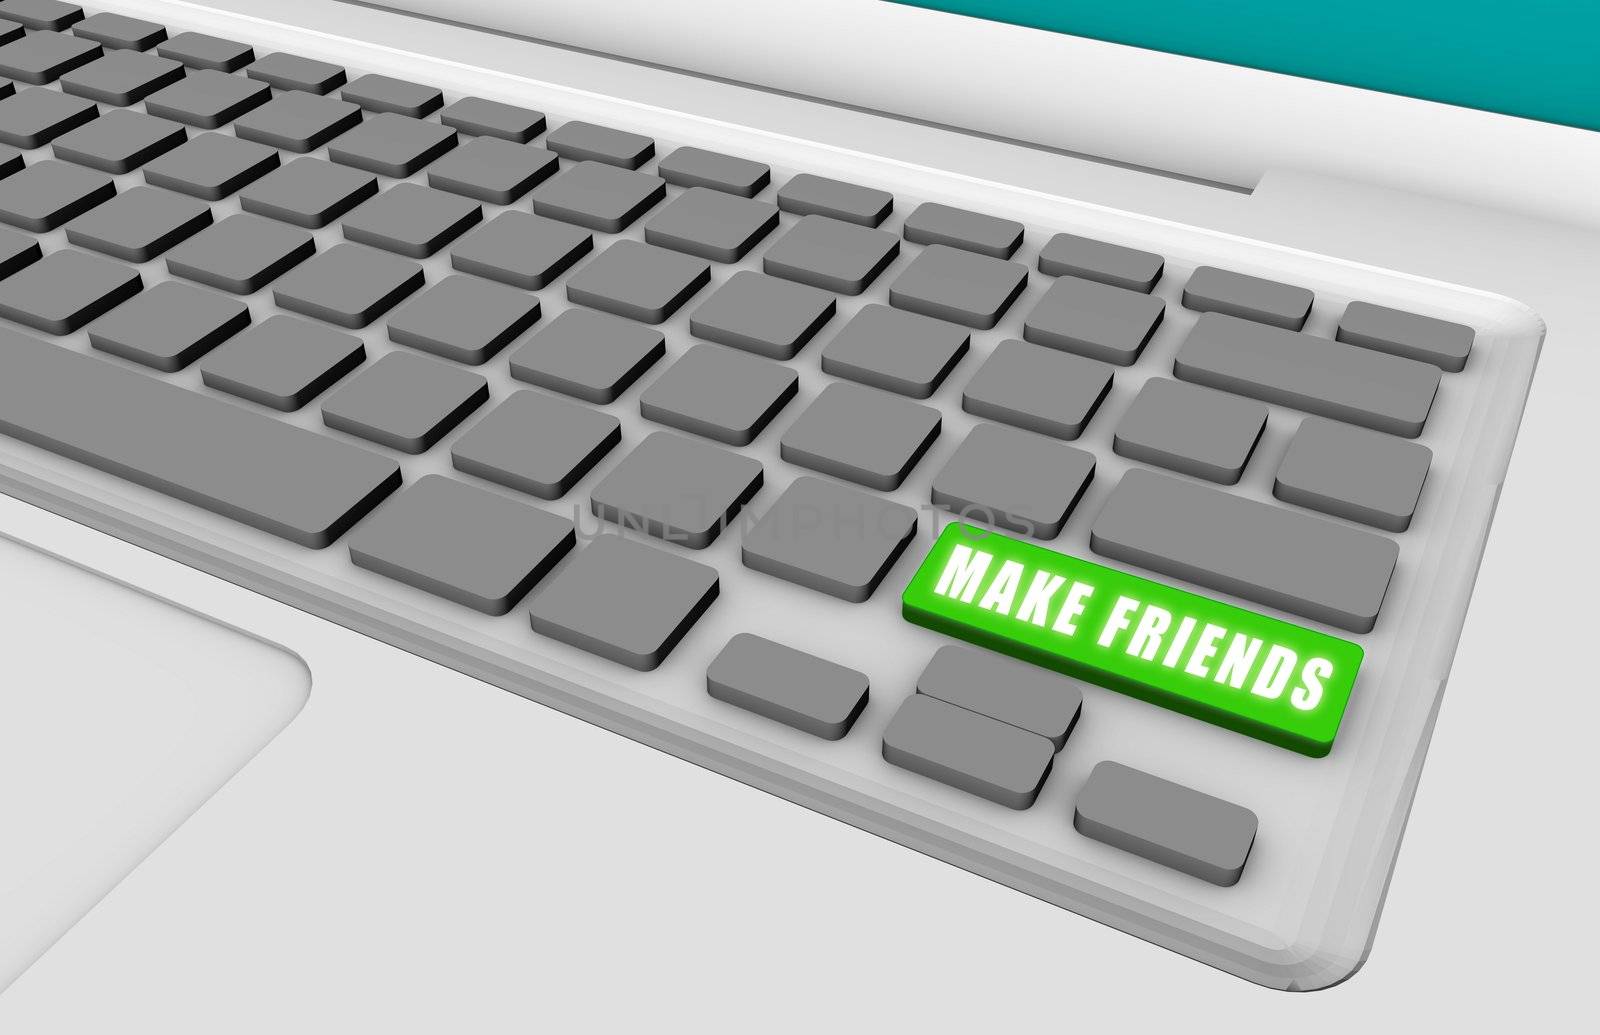 Make Friends with a Green Keyboard Button